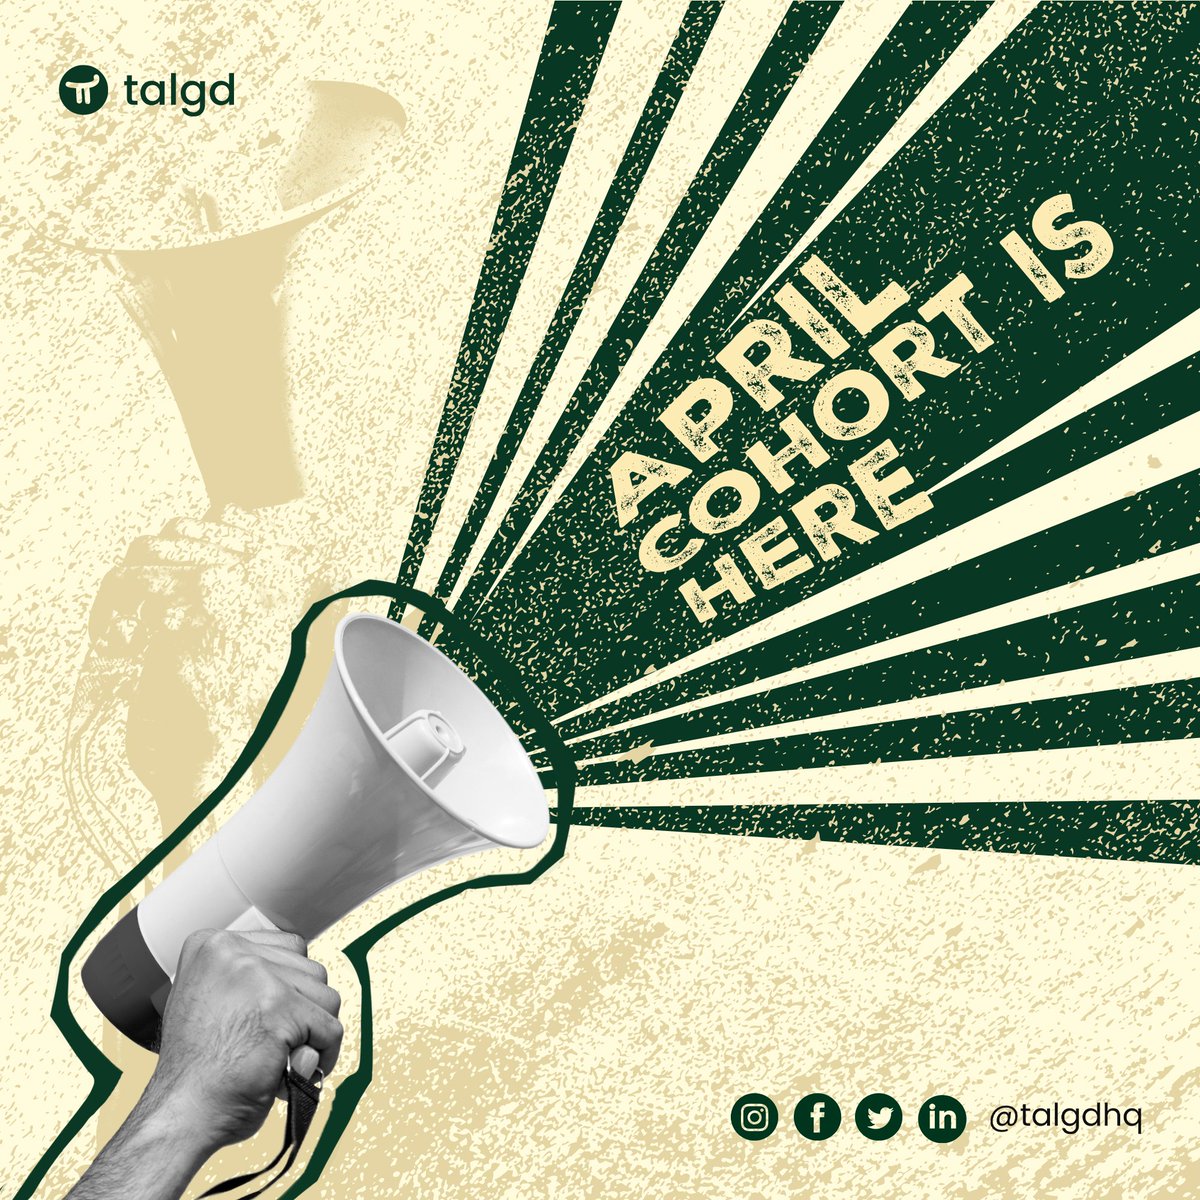 Unlock your potential with our April cohort tech training!
Join us as we equip you with cutting-edge tech skills to help you succeed in the digital world.
#talgd #TechTraining #AprilCohort #UnlockYourPotential #DigitalSkills #TechEducation #edtech #insideosogbo #MondayMotivation